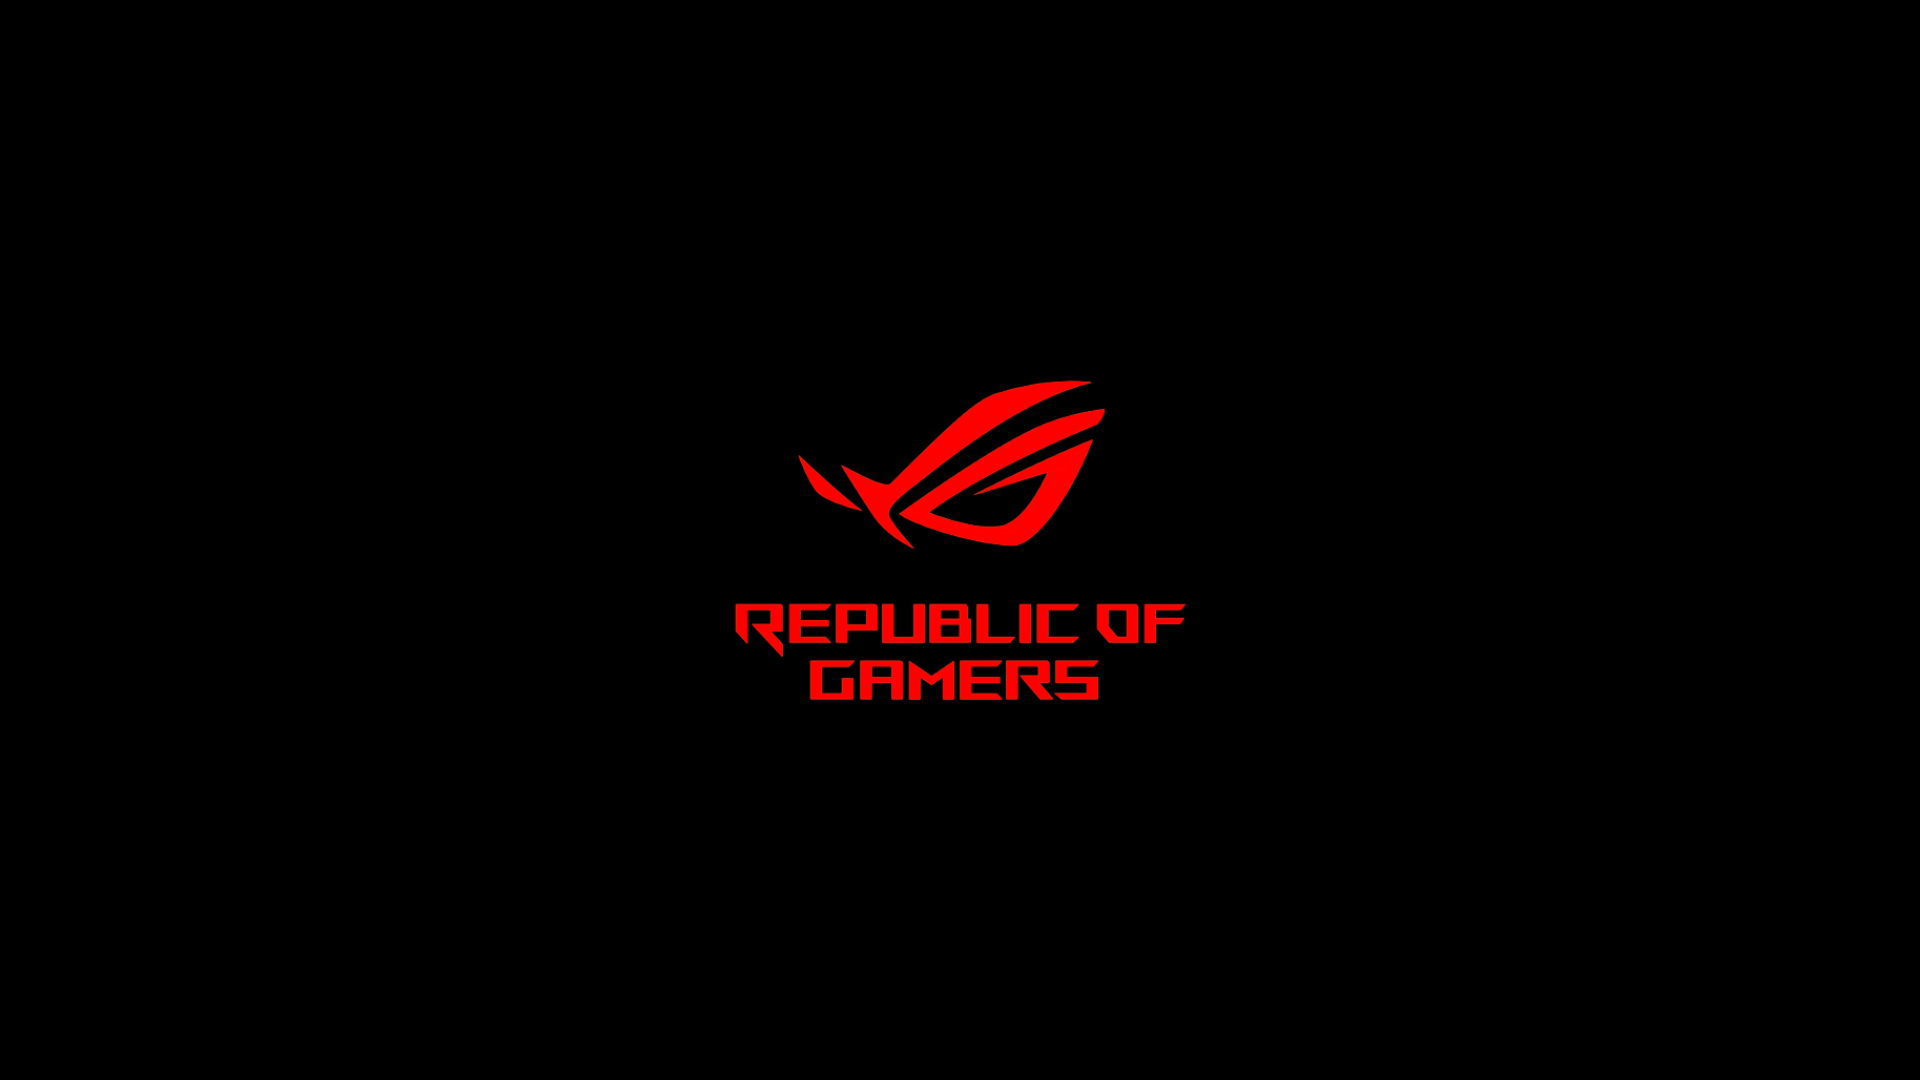 General 1920x1080 ASUS Republic of Gamers minimalism simple background red brand